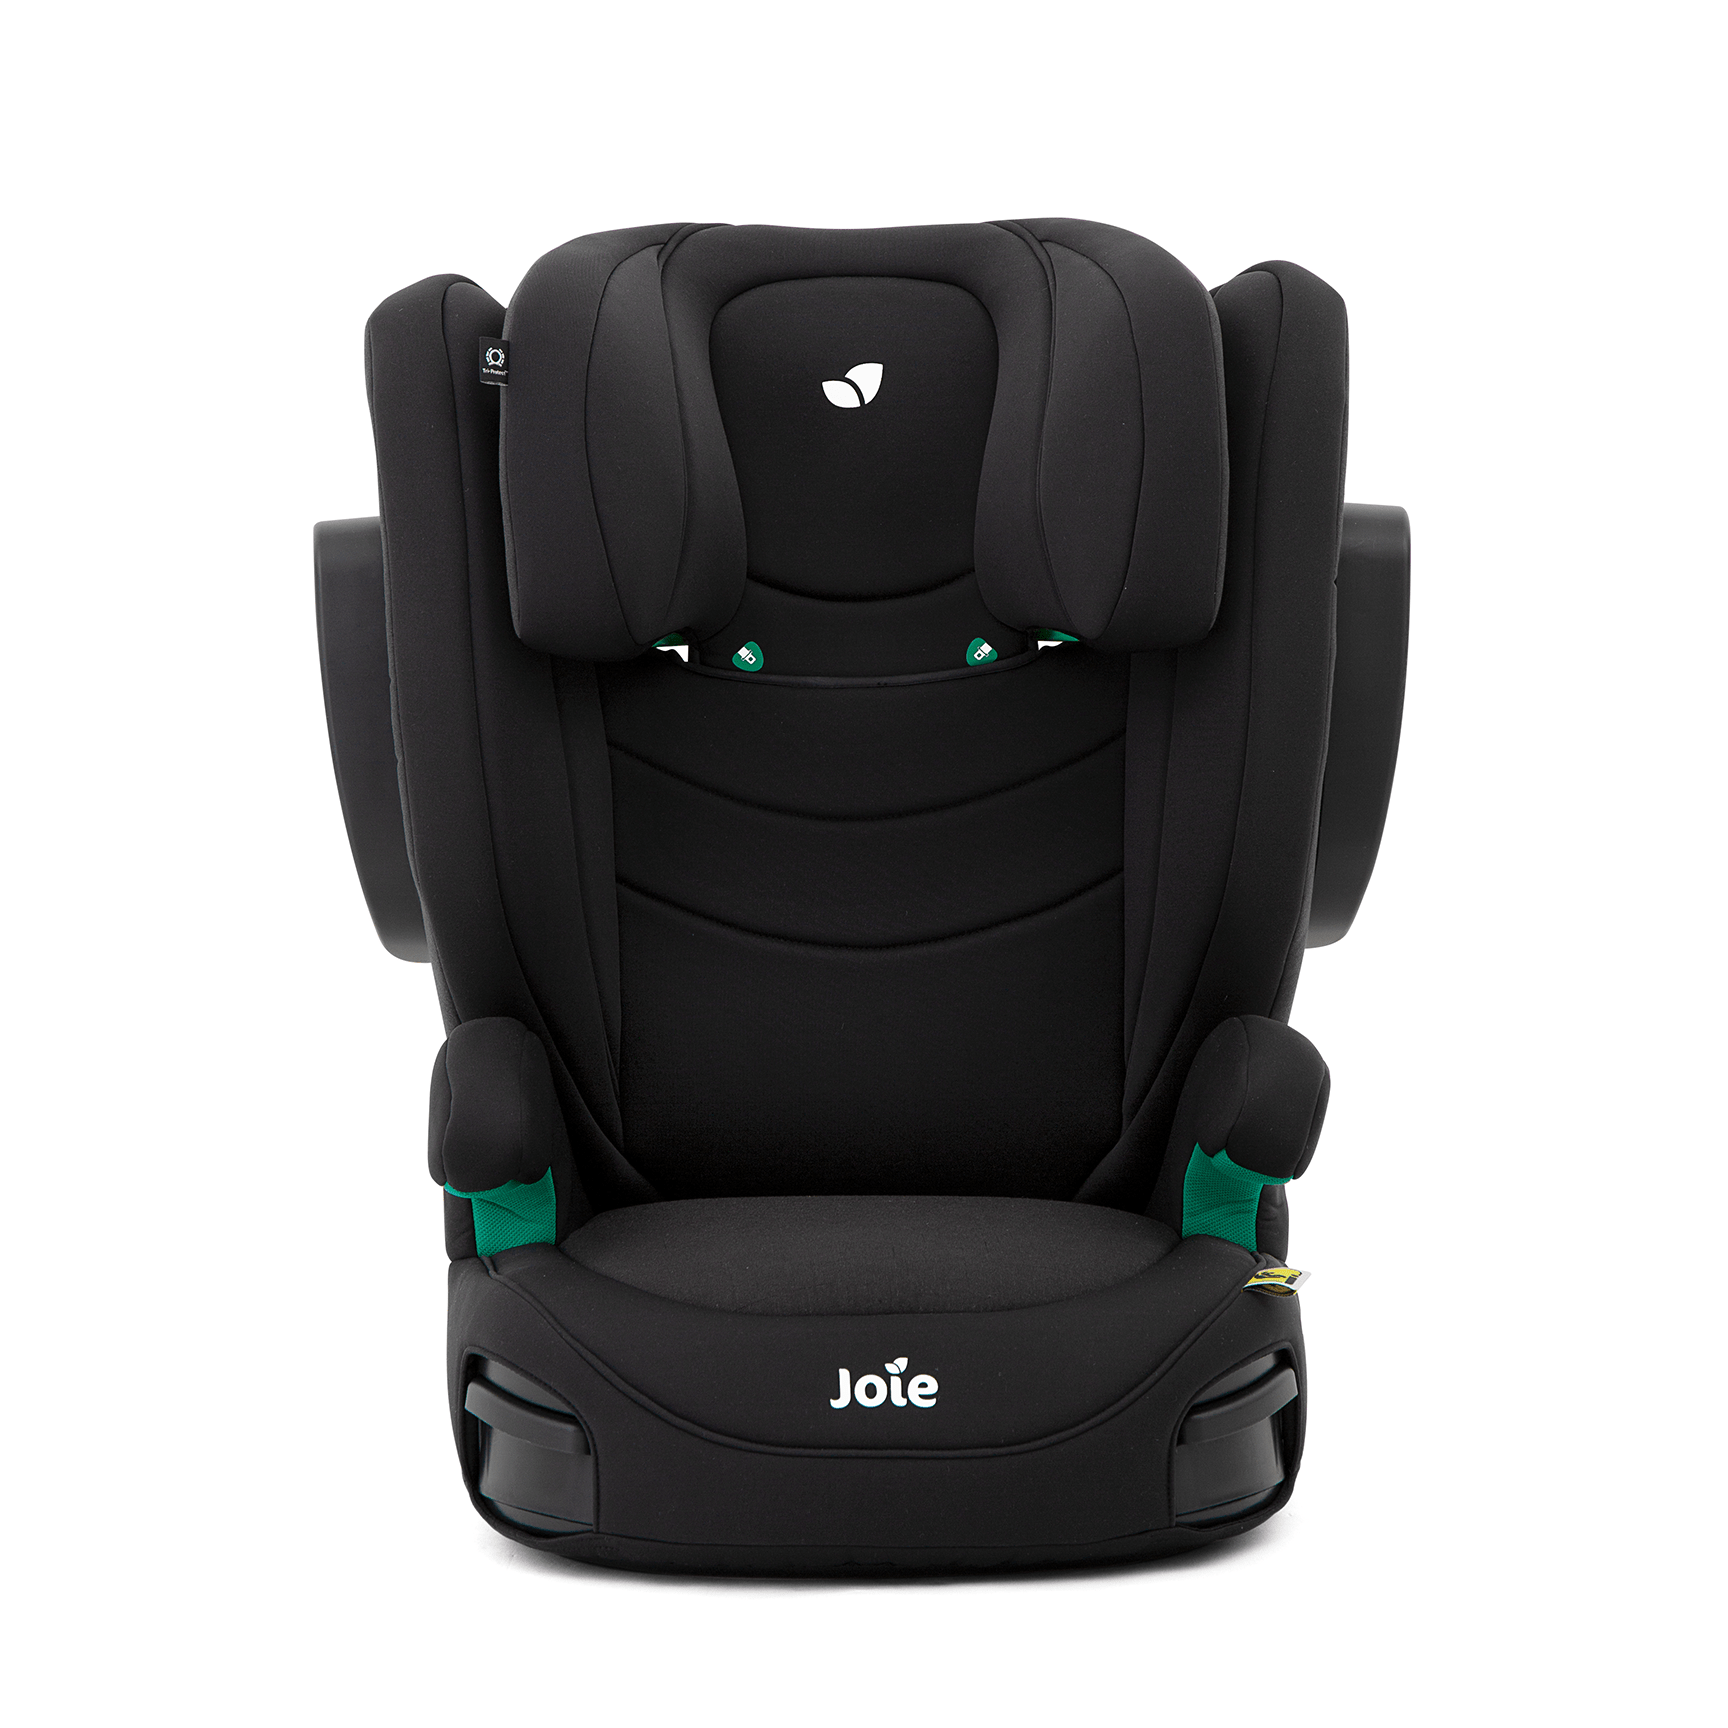 Joie baby car seats Joie i-Trillo Car Seat - Shale